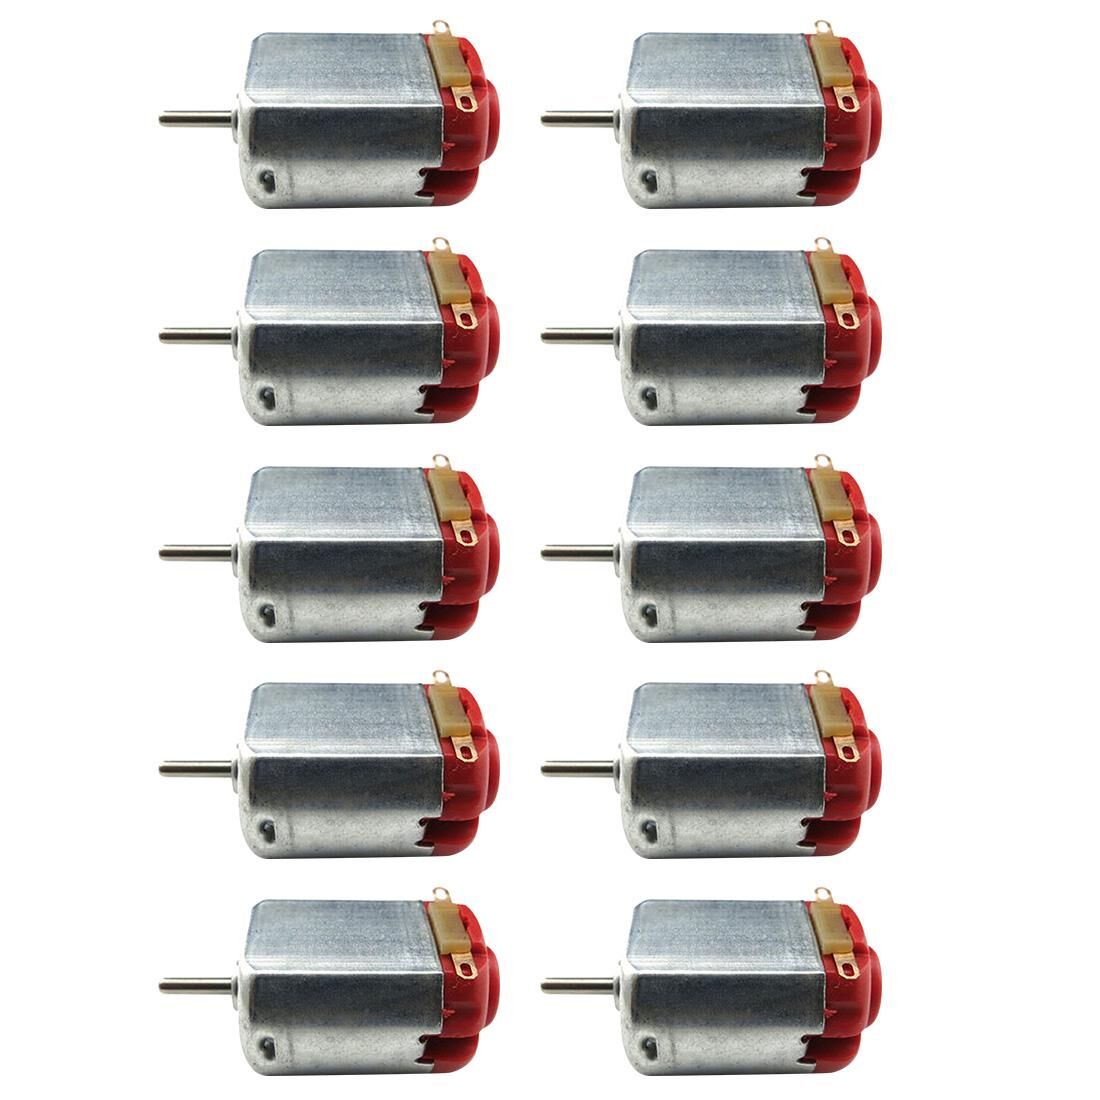 Electronic Kit Micro 130 Four Drive DC Motor Small Motor Production Of 3V DC Motor for DIY Toys Hobbies Smart Car